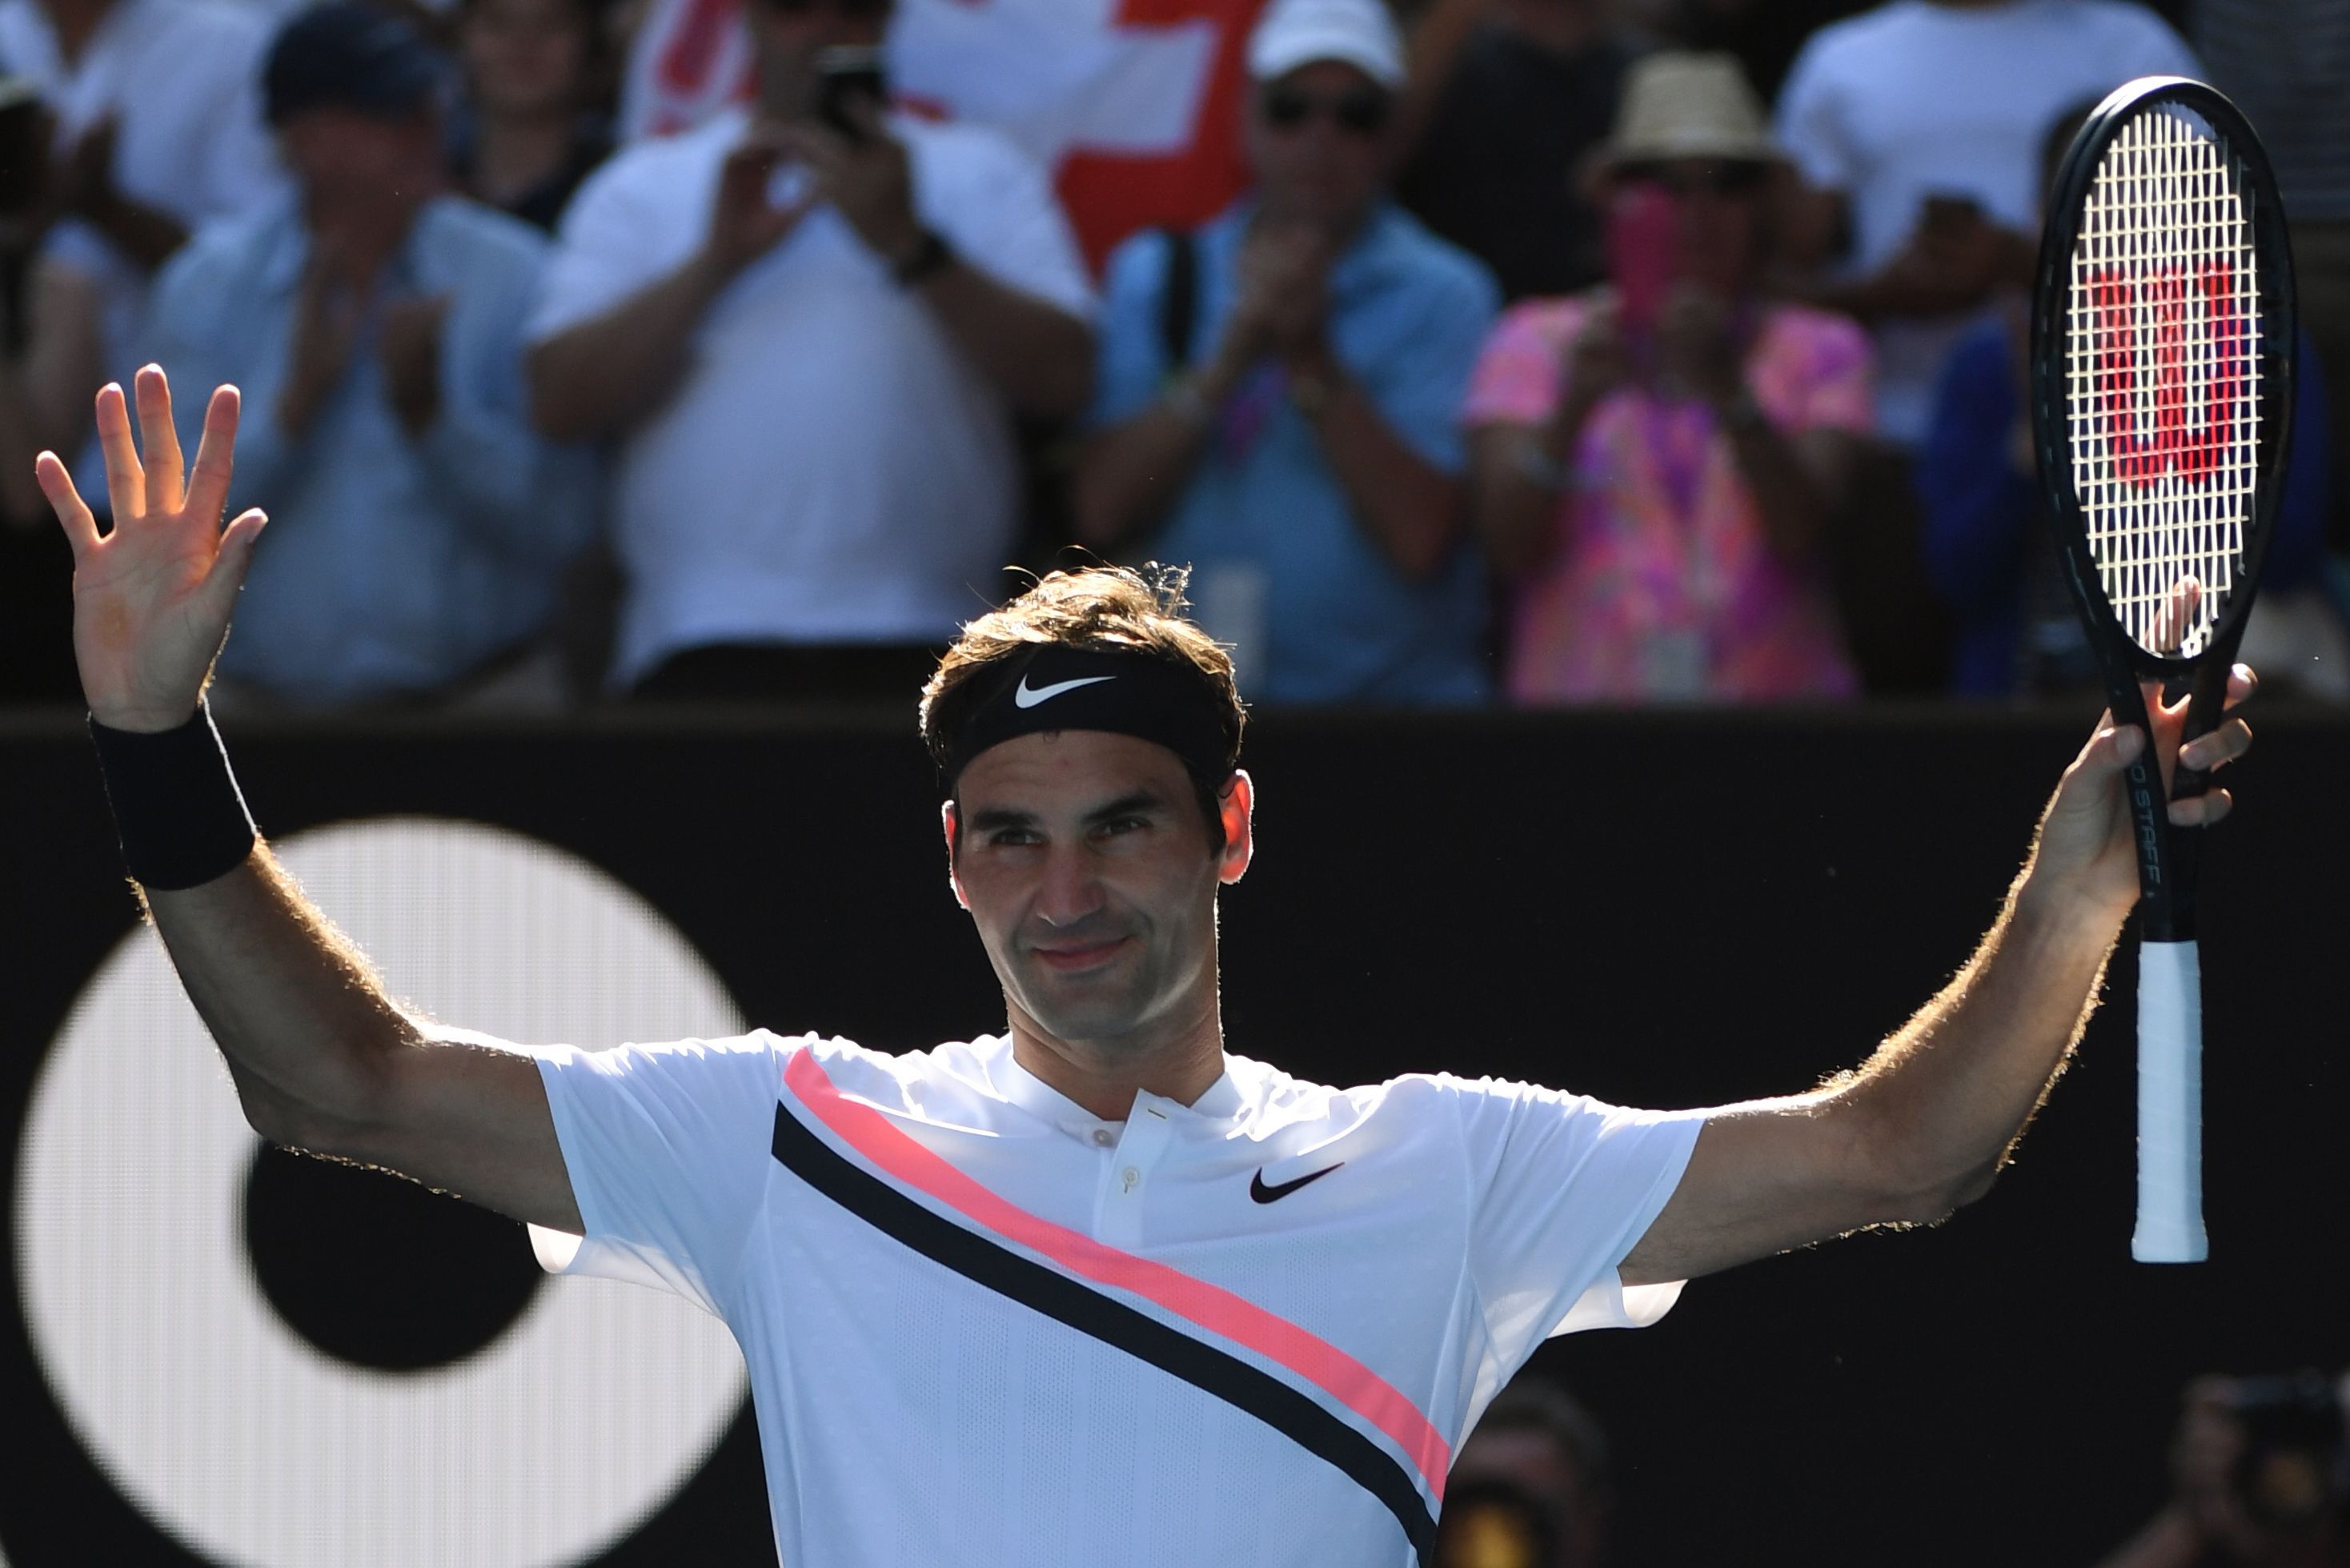 Australian Open 2018 Results: Monday Bracket Winners, Scores and Top Stats | Bleacher Report | Latest Videos and